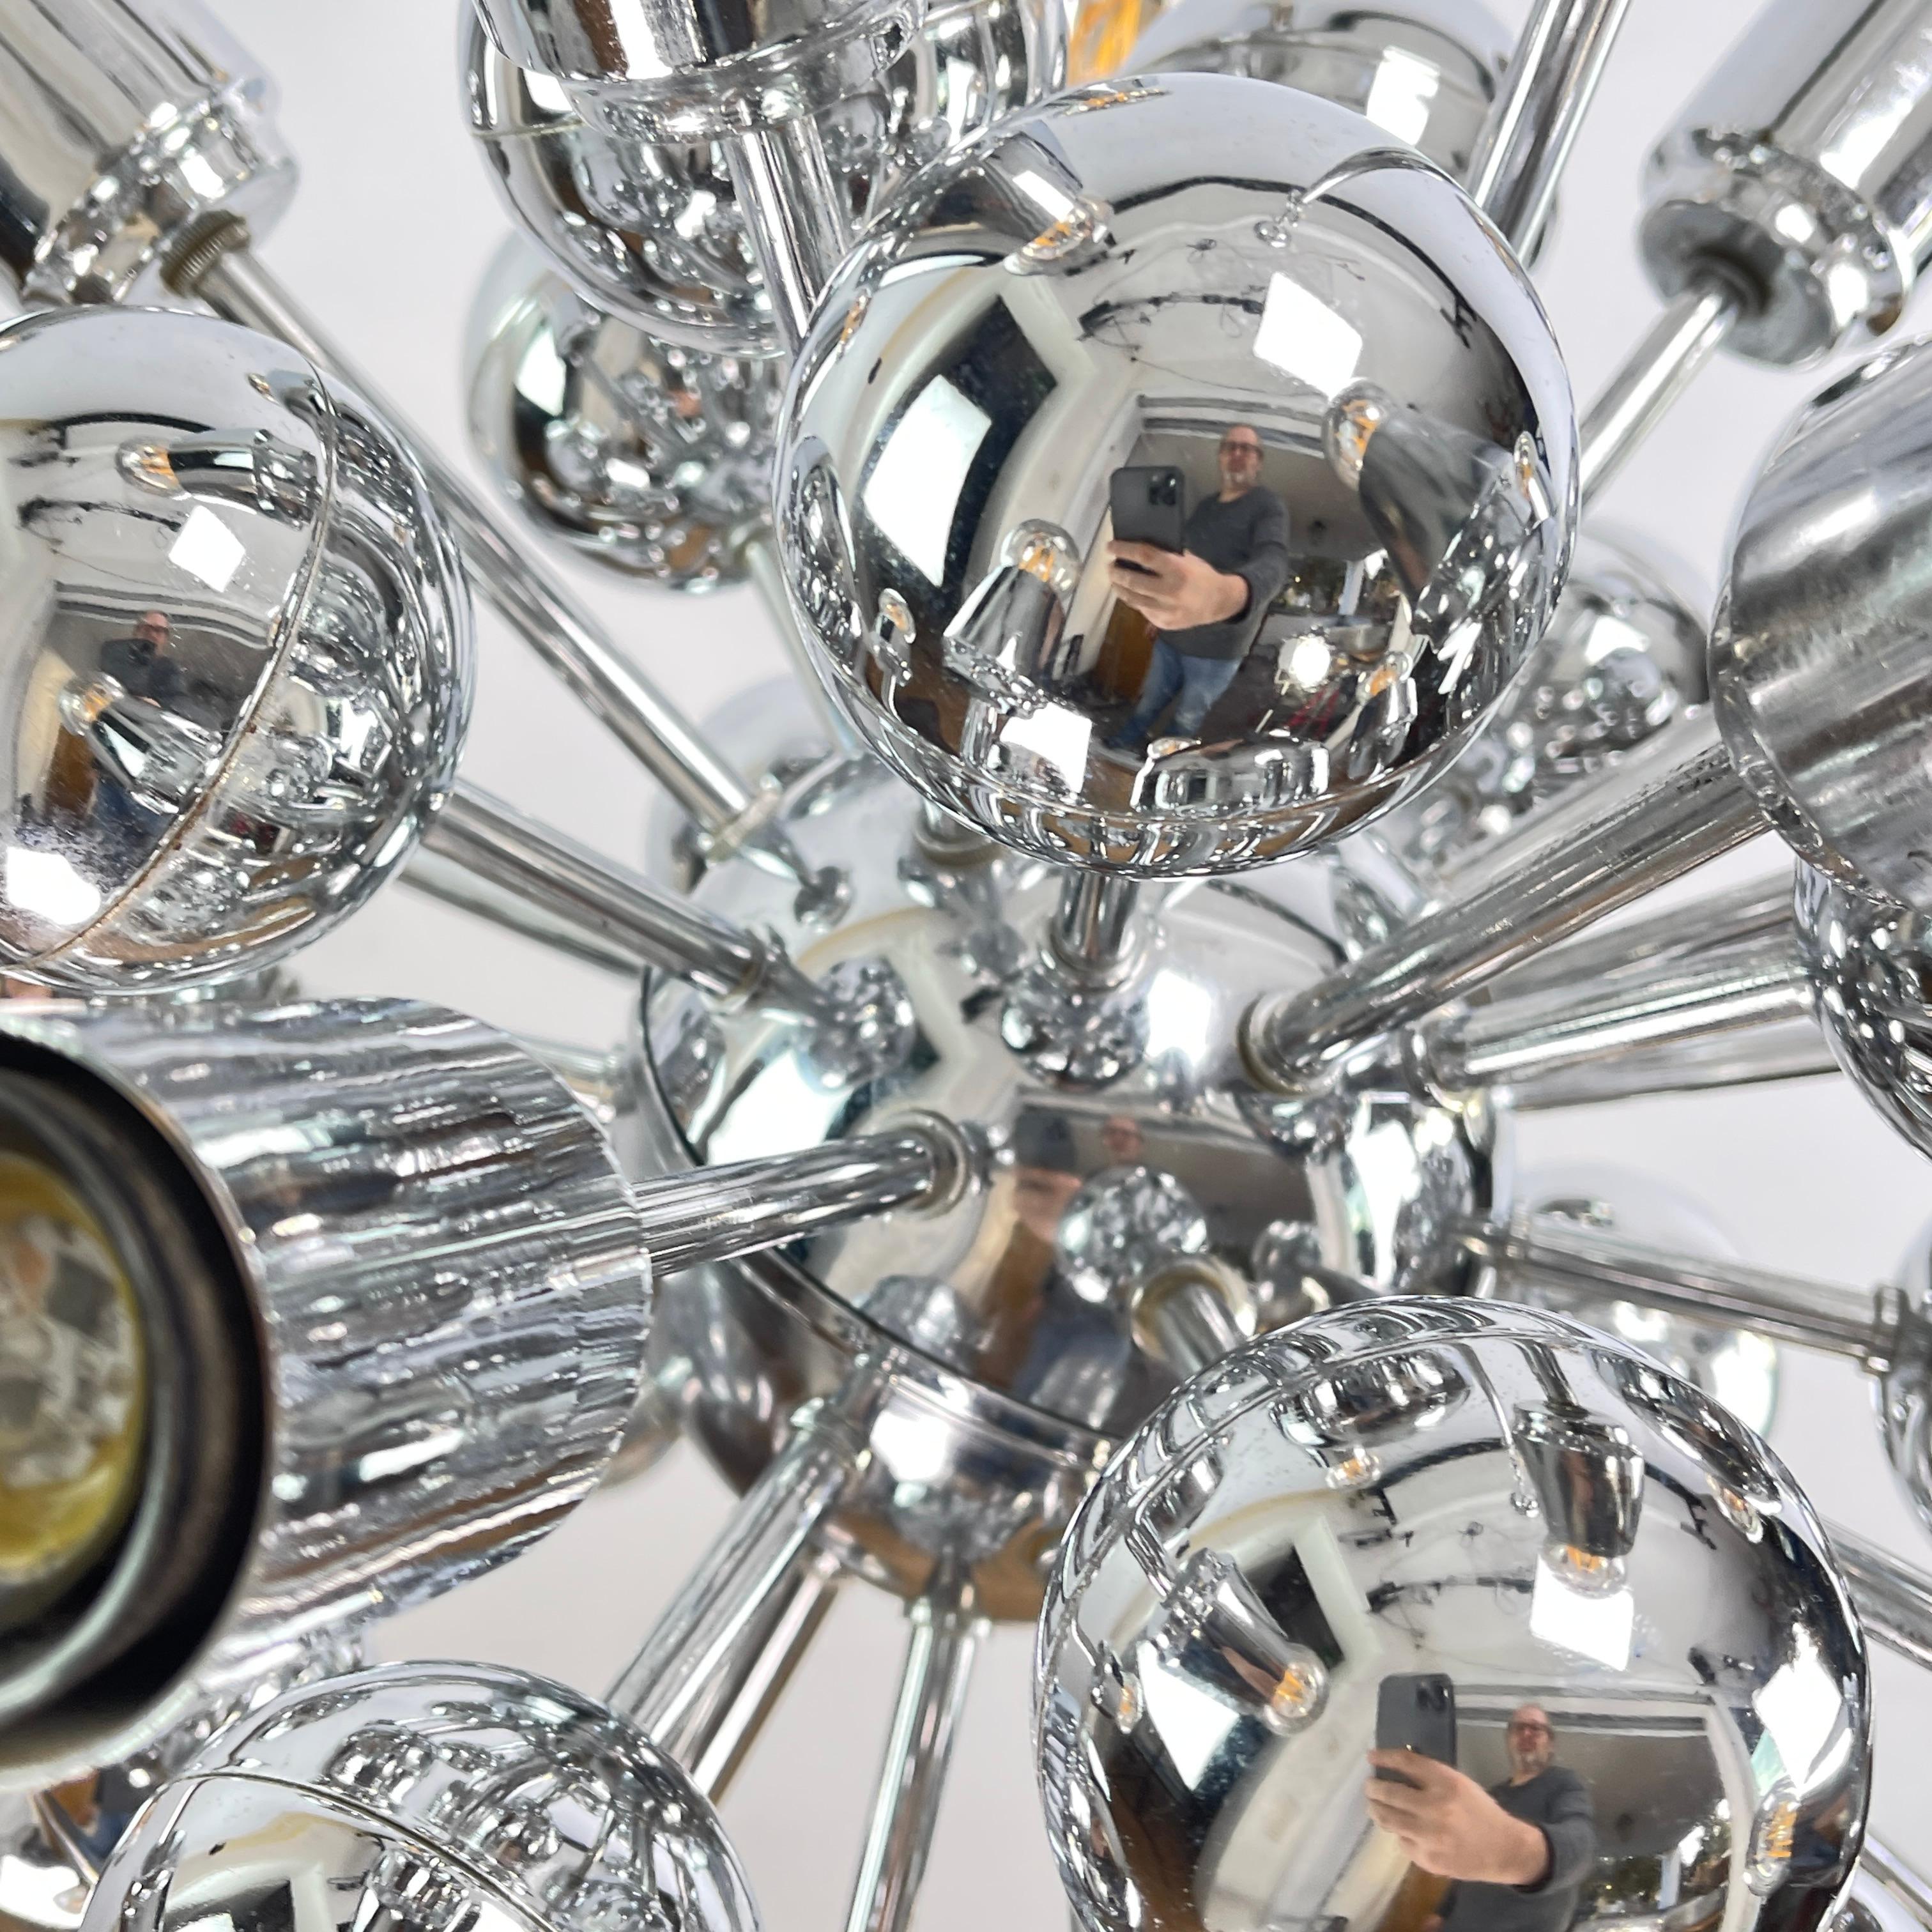 REGGIANI Sputnik ceiling lamp - 1970s

This stylish Reggiani Sputnik chrome lamp from the 70s is a timeless design piece that perfectly embodies the charm and elegance of the era. With its striking sputnik design, this lamp is a real eye-catcher